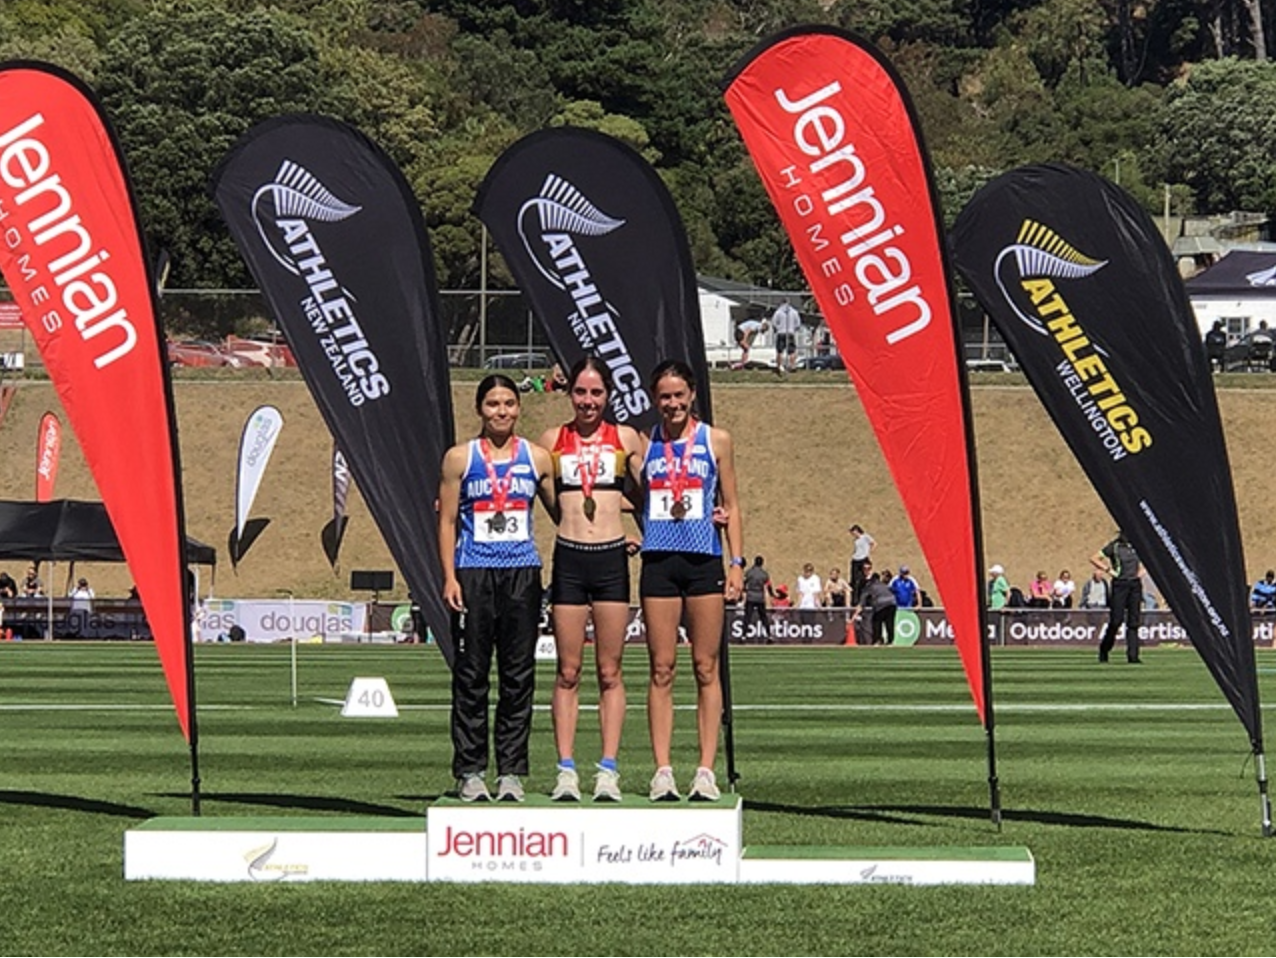 Silver Medal at NZ Track and Field Champs for Lisa!